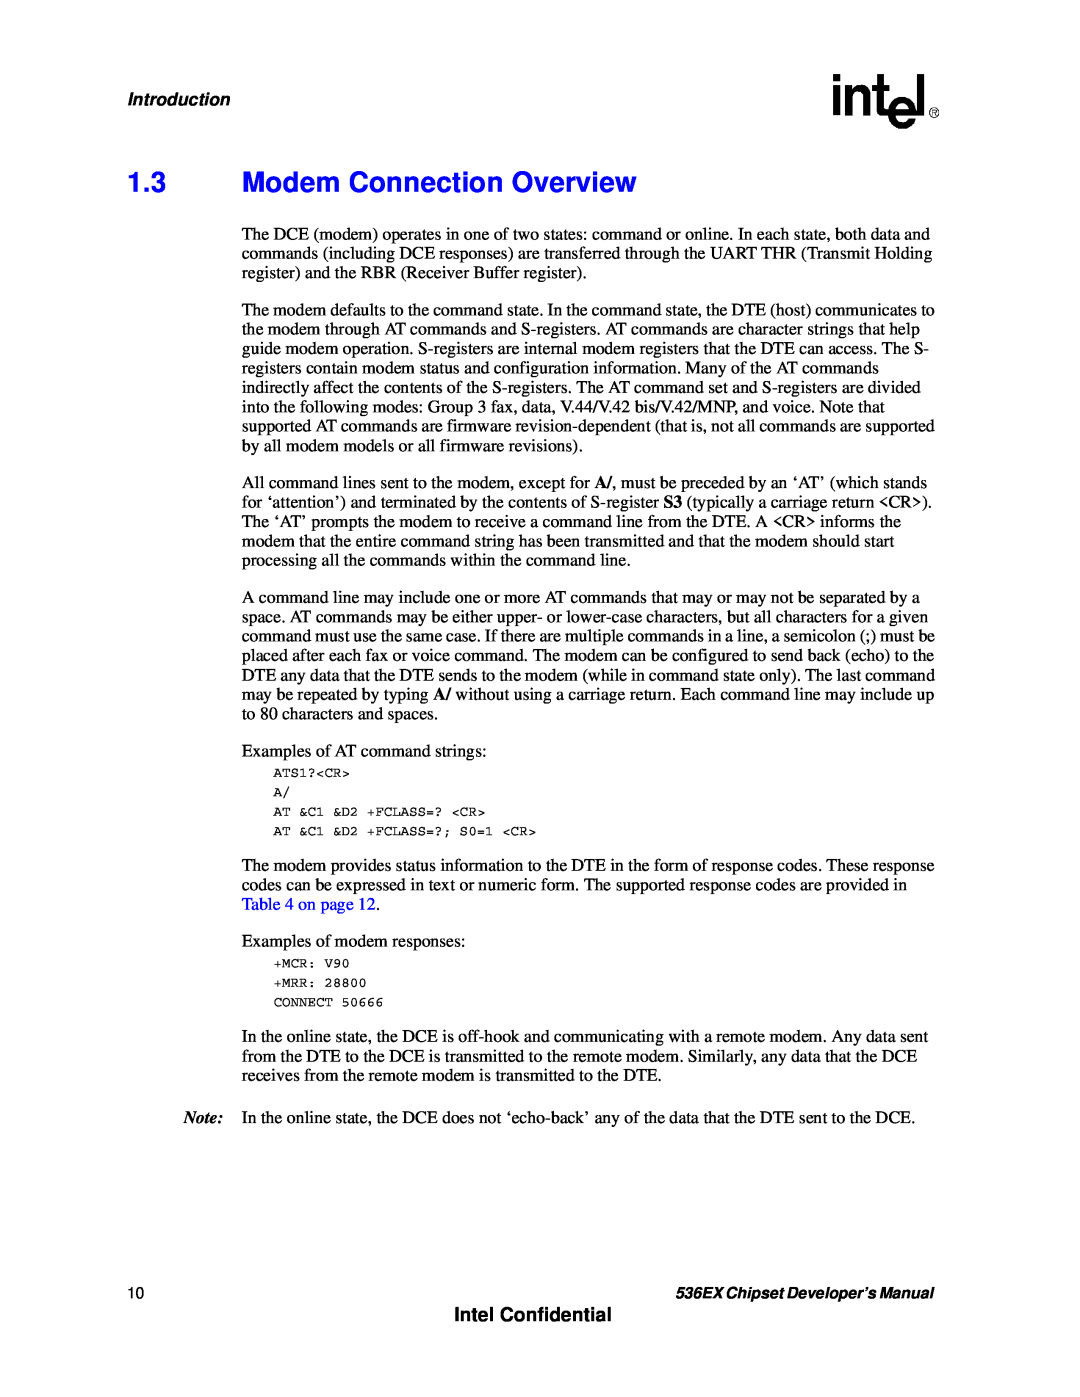 Intel 536EX manual 1.3Modem Connection Overview, Intel Confidential, Introduction 